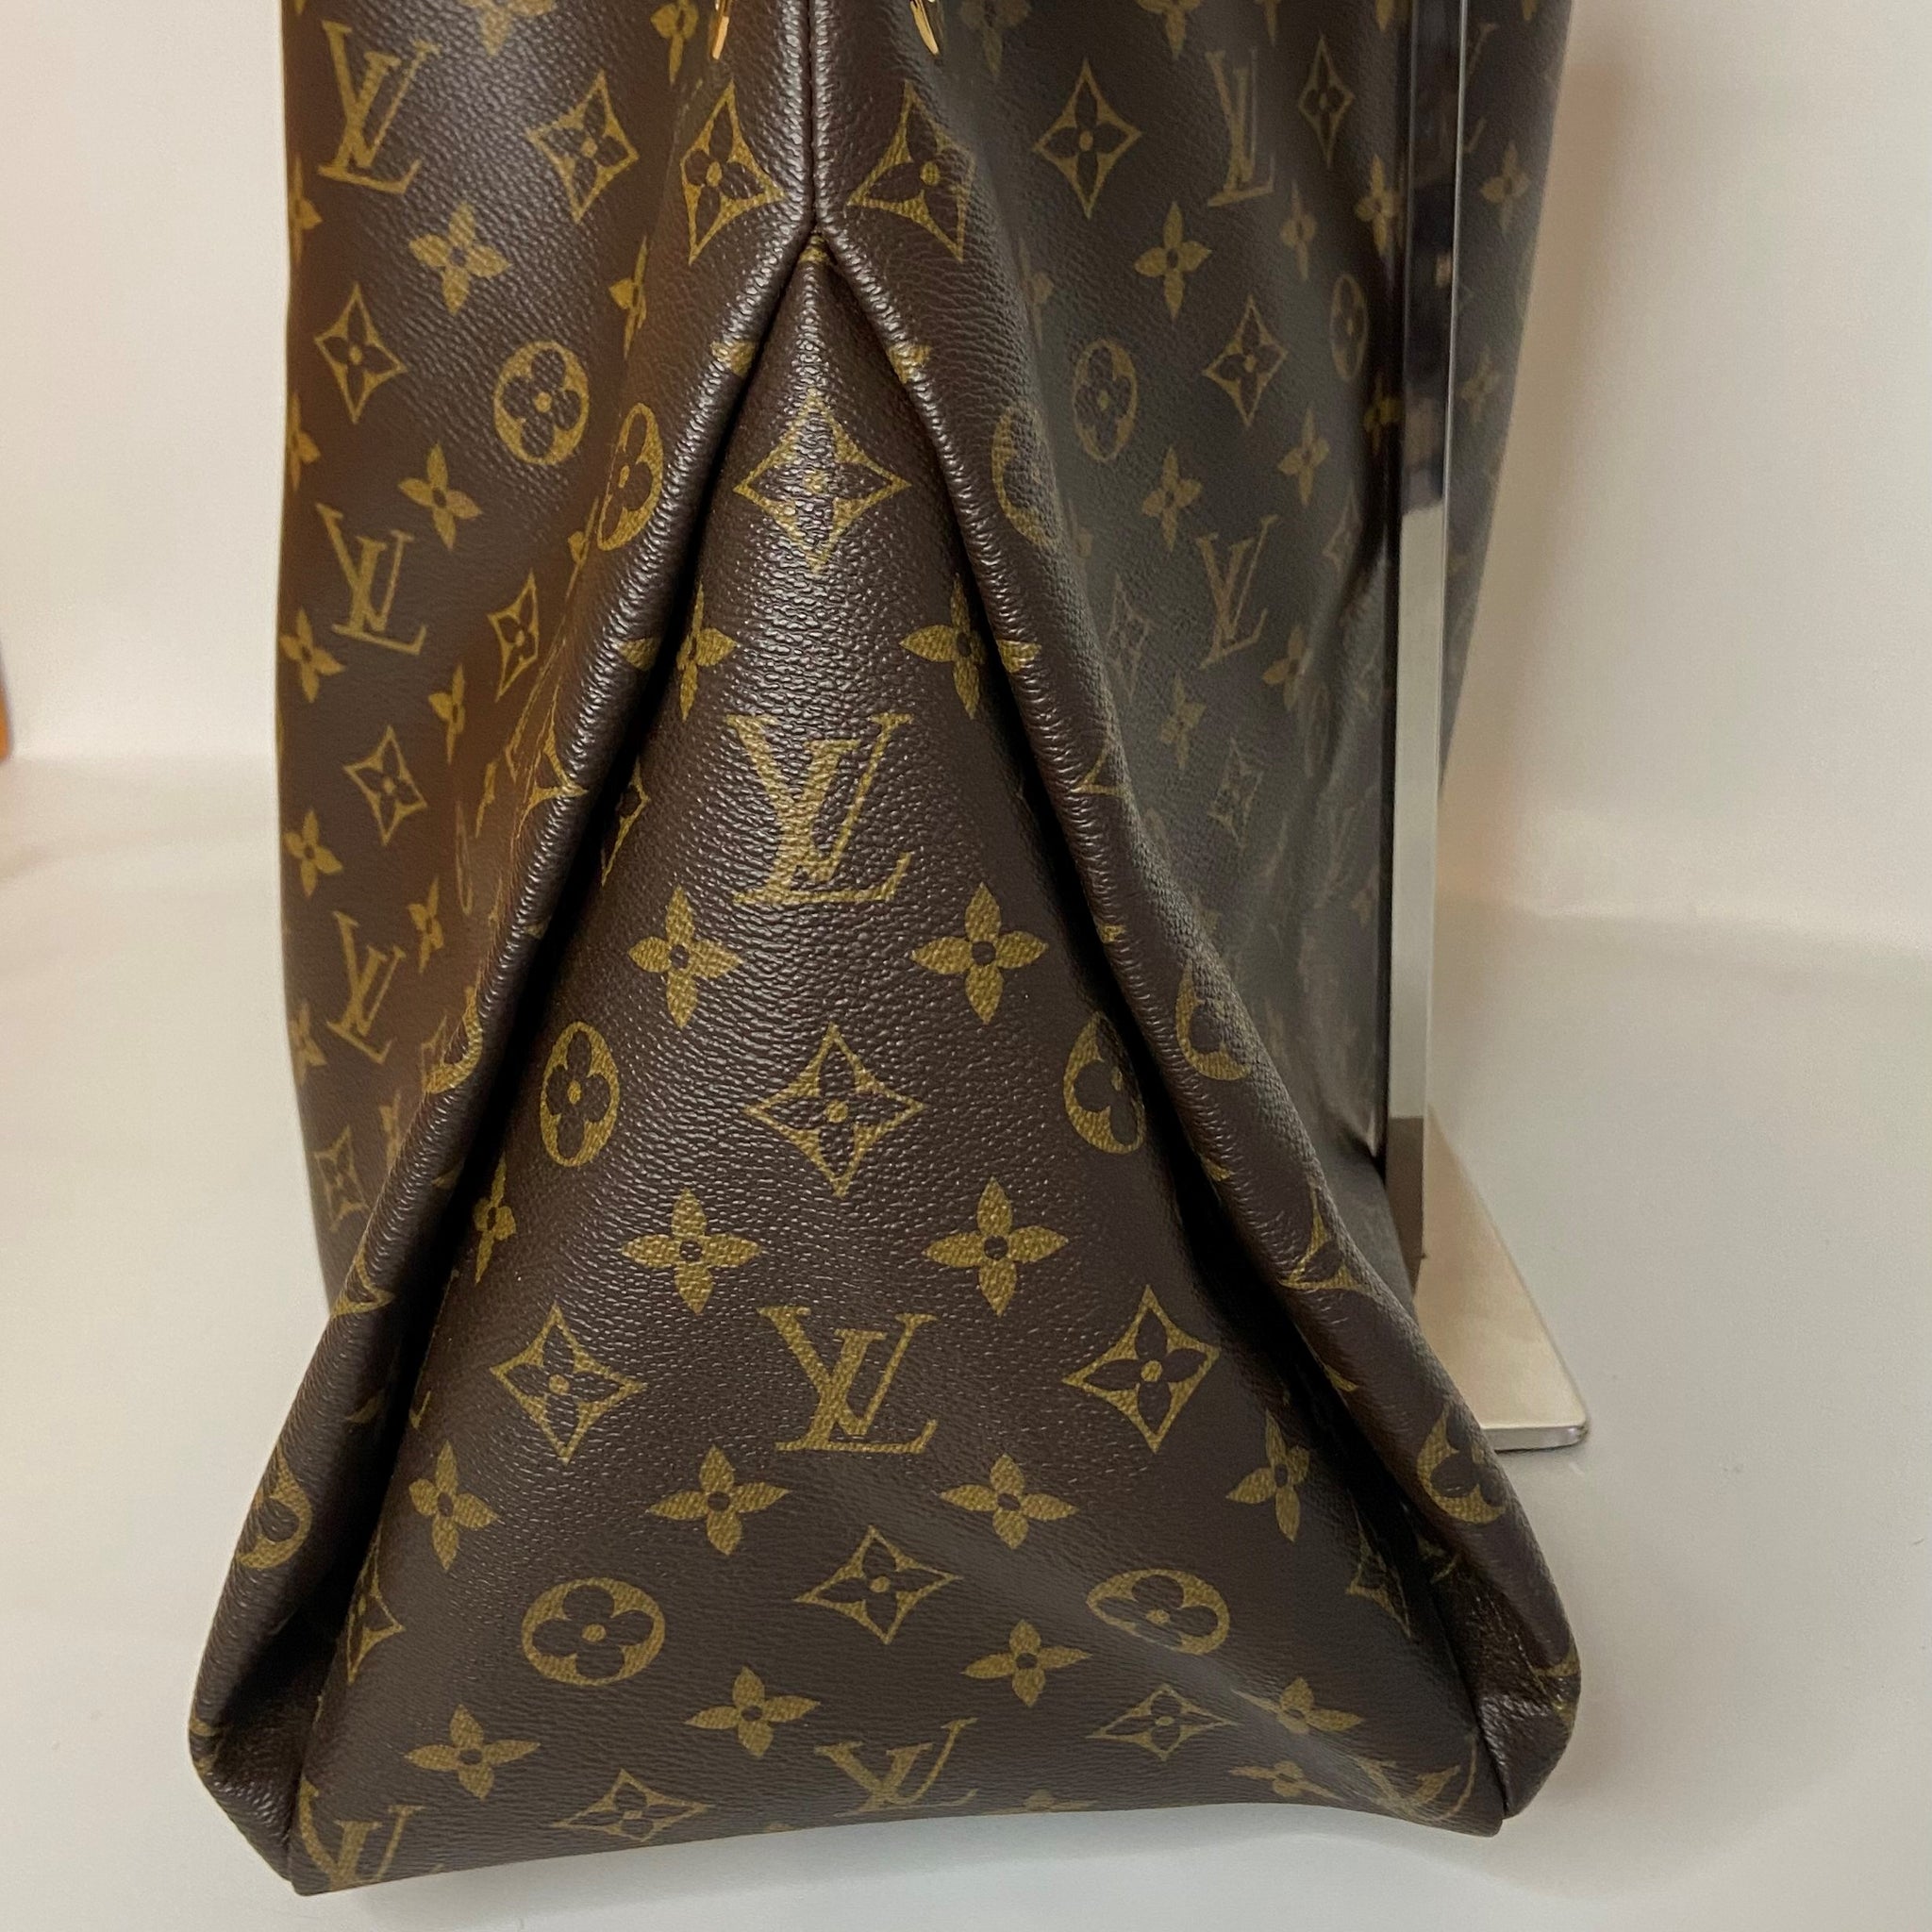 How can you tell if a Louis Vuitton Artsy bag is real? - Questions